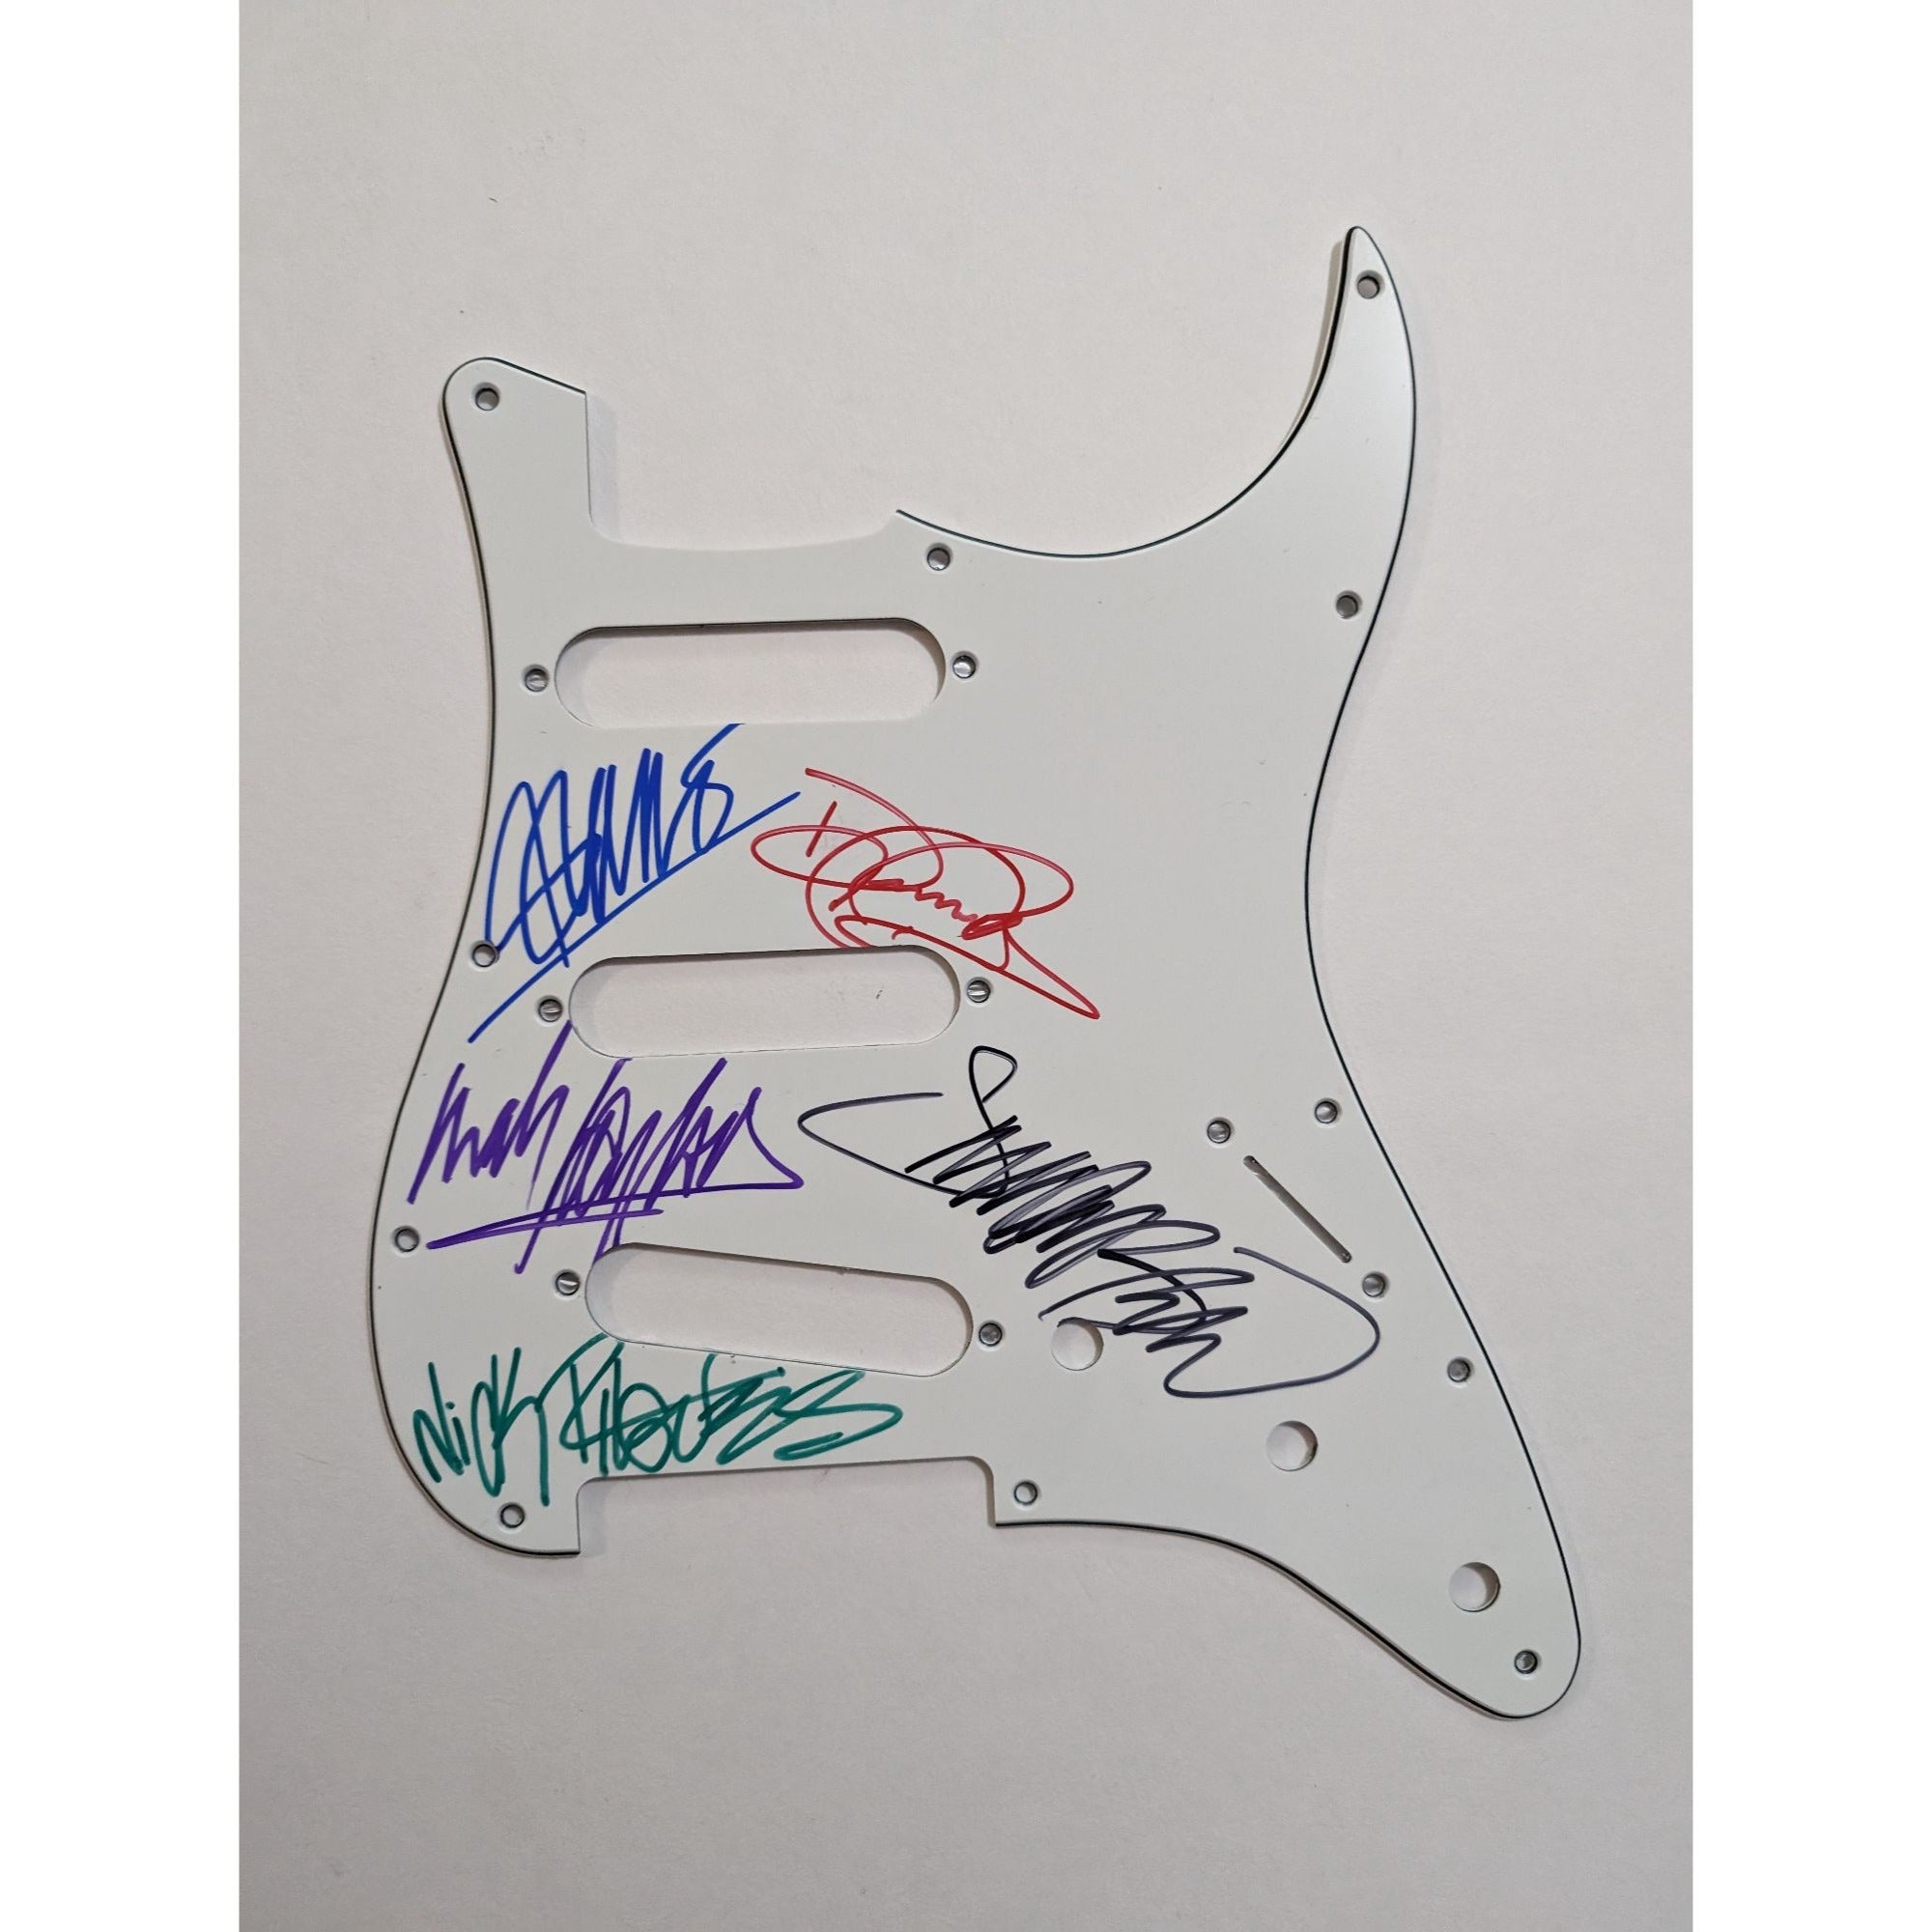 Duran Duran Simon Lebon Nick Rhodes John Taylor Andy Taylor Fender Stratocaster electric guitar pick guard signed with proof